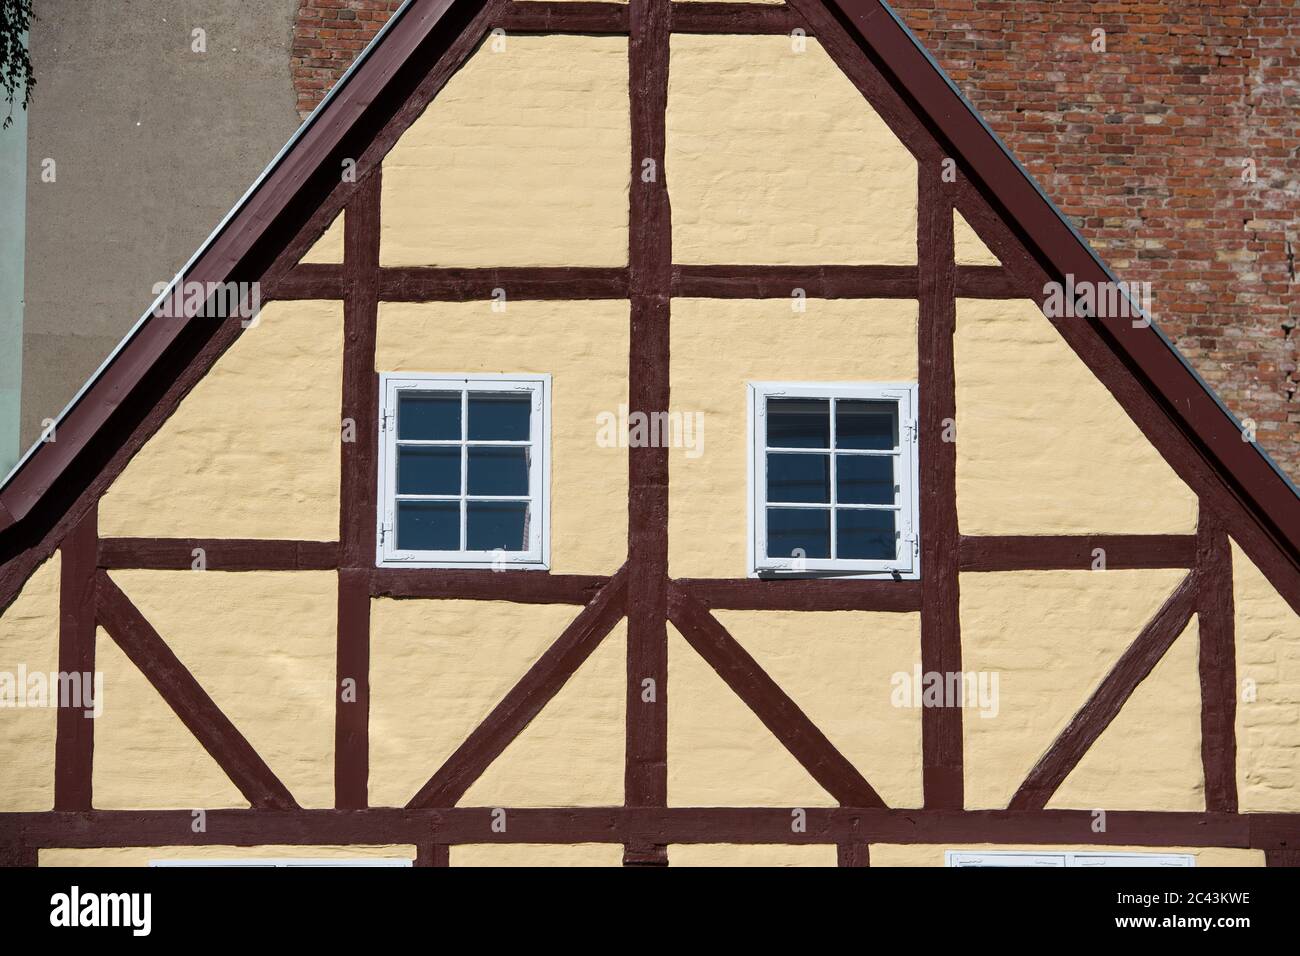 15 June 2020, Mecklenburg-Western Pomerania, Stralsund: Half-timbered houses in the monastery courtyard of the former Franciscan monastery St. Johannis (Johanniskloster) in the old town of Stralsund. The Hanseatic city of Stralsund, first mentioned in 1234, is one of the tourist magnets in Mecklenburg-Vorpommern because of the more than 500 listed buildings, most of which have been extensively restored in recent years with the trustee redevelopment company Stadterneuerungsgesellschaft Stralsund mbH (SES). In June 2002, the medieval old town centre of Stralsund was included in the UNESCO list o Stock Photo